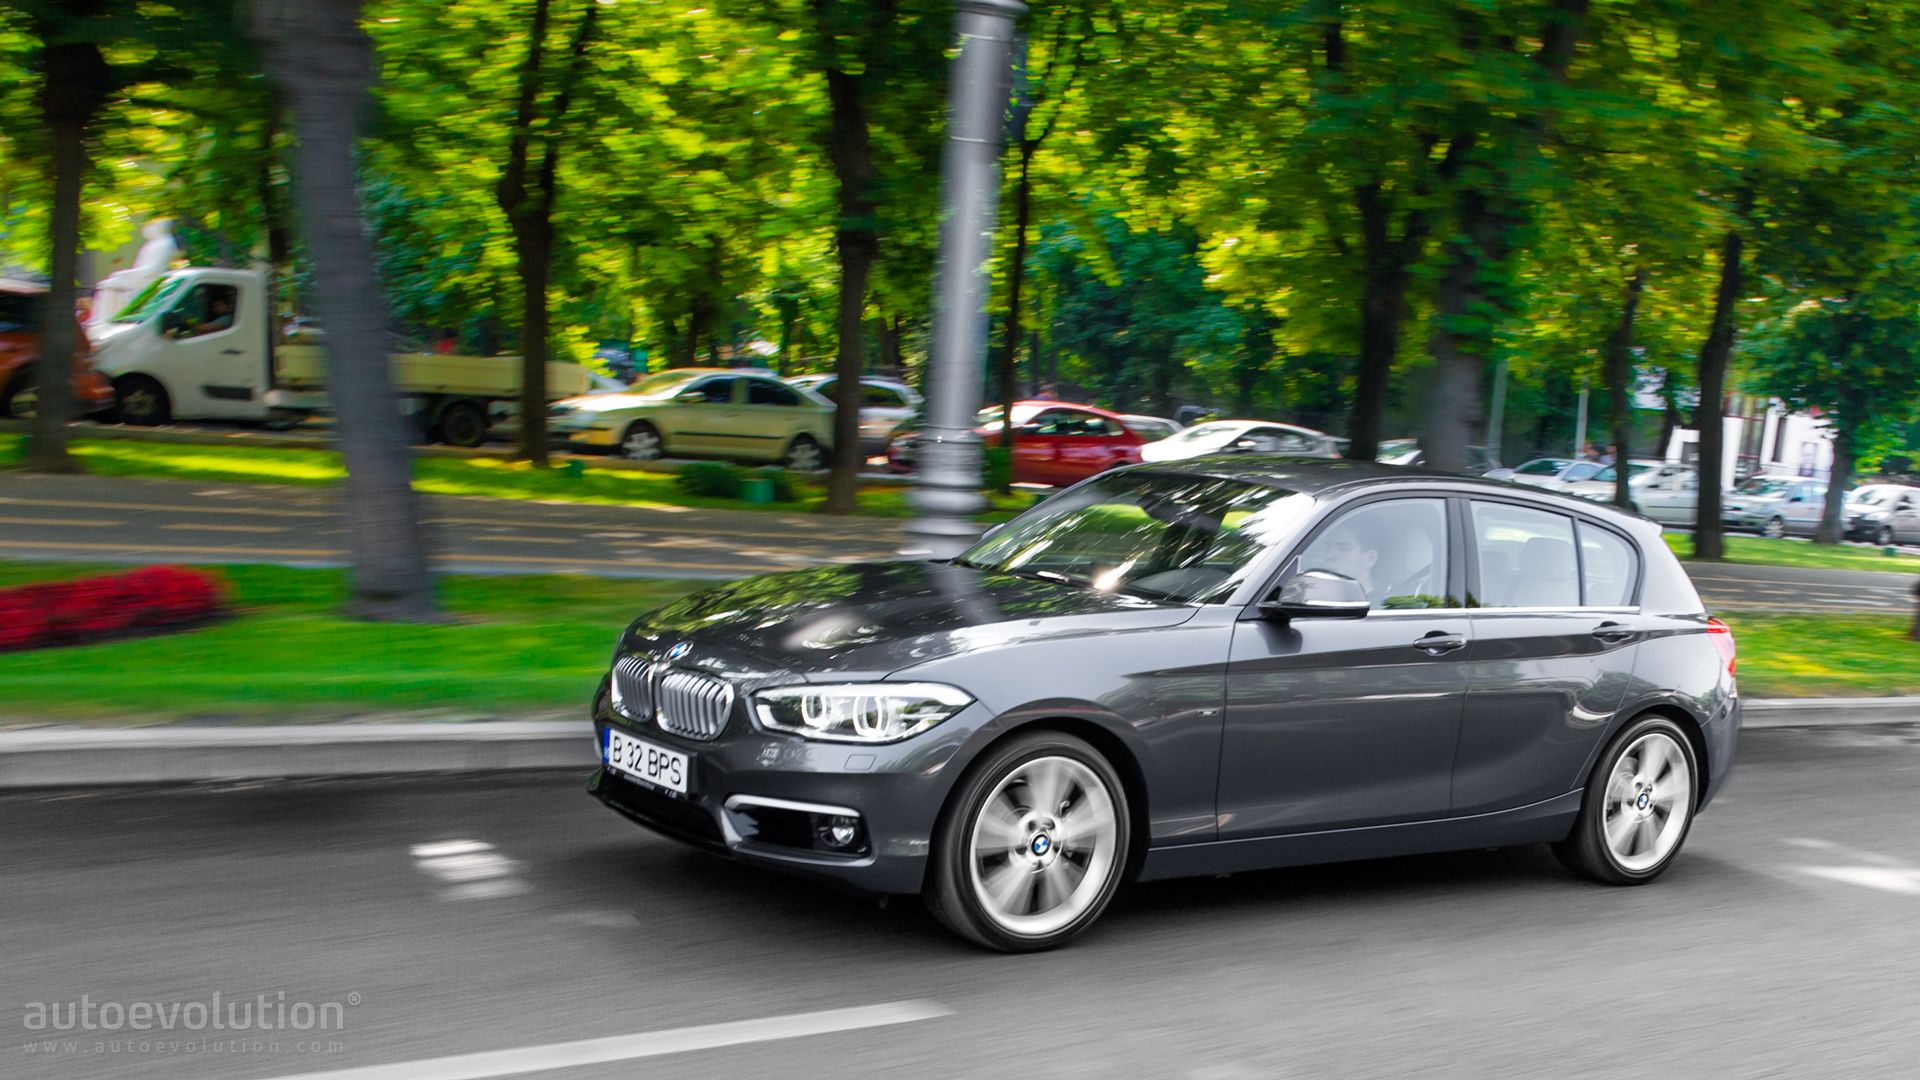 BMW 1 Series Used Car Review: Common Problems of the 2011 Dream -  autoevolution